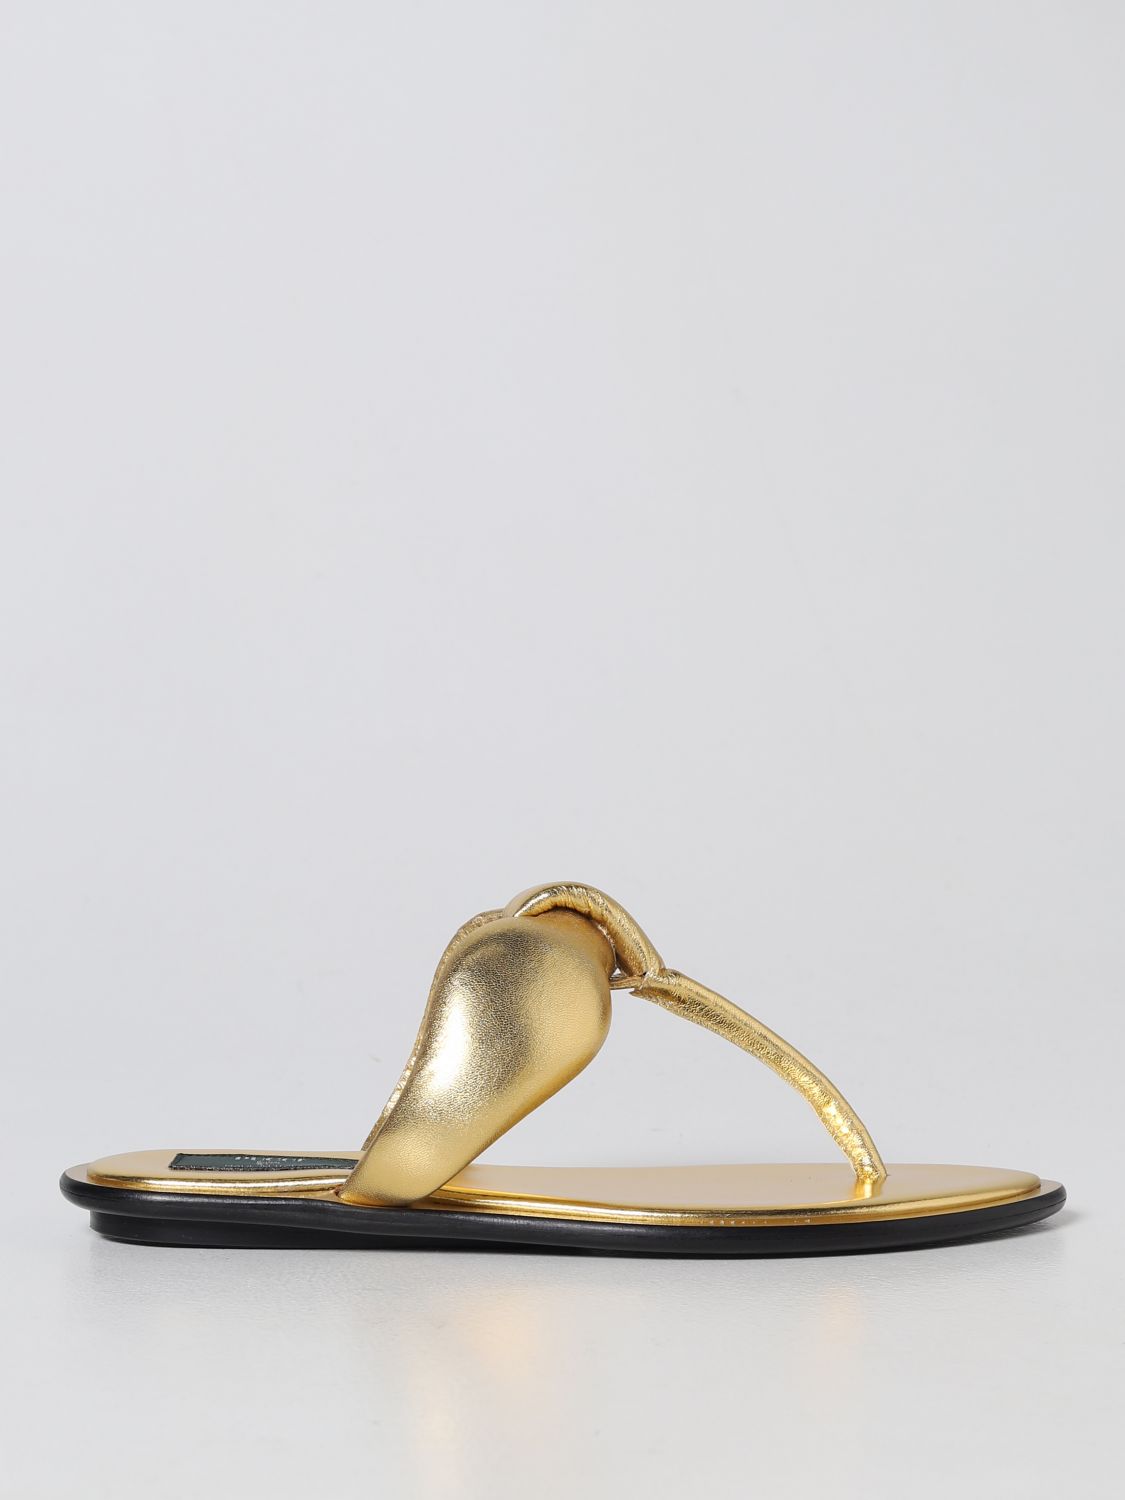 Emilio Pucci Thong Sandals - Laminated Nappa In Silver